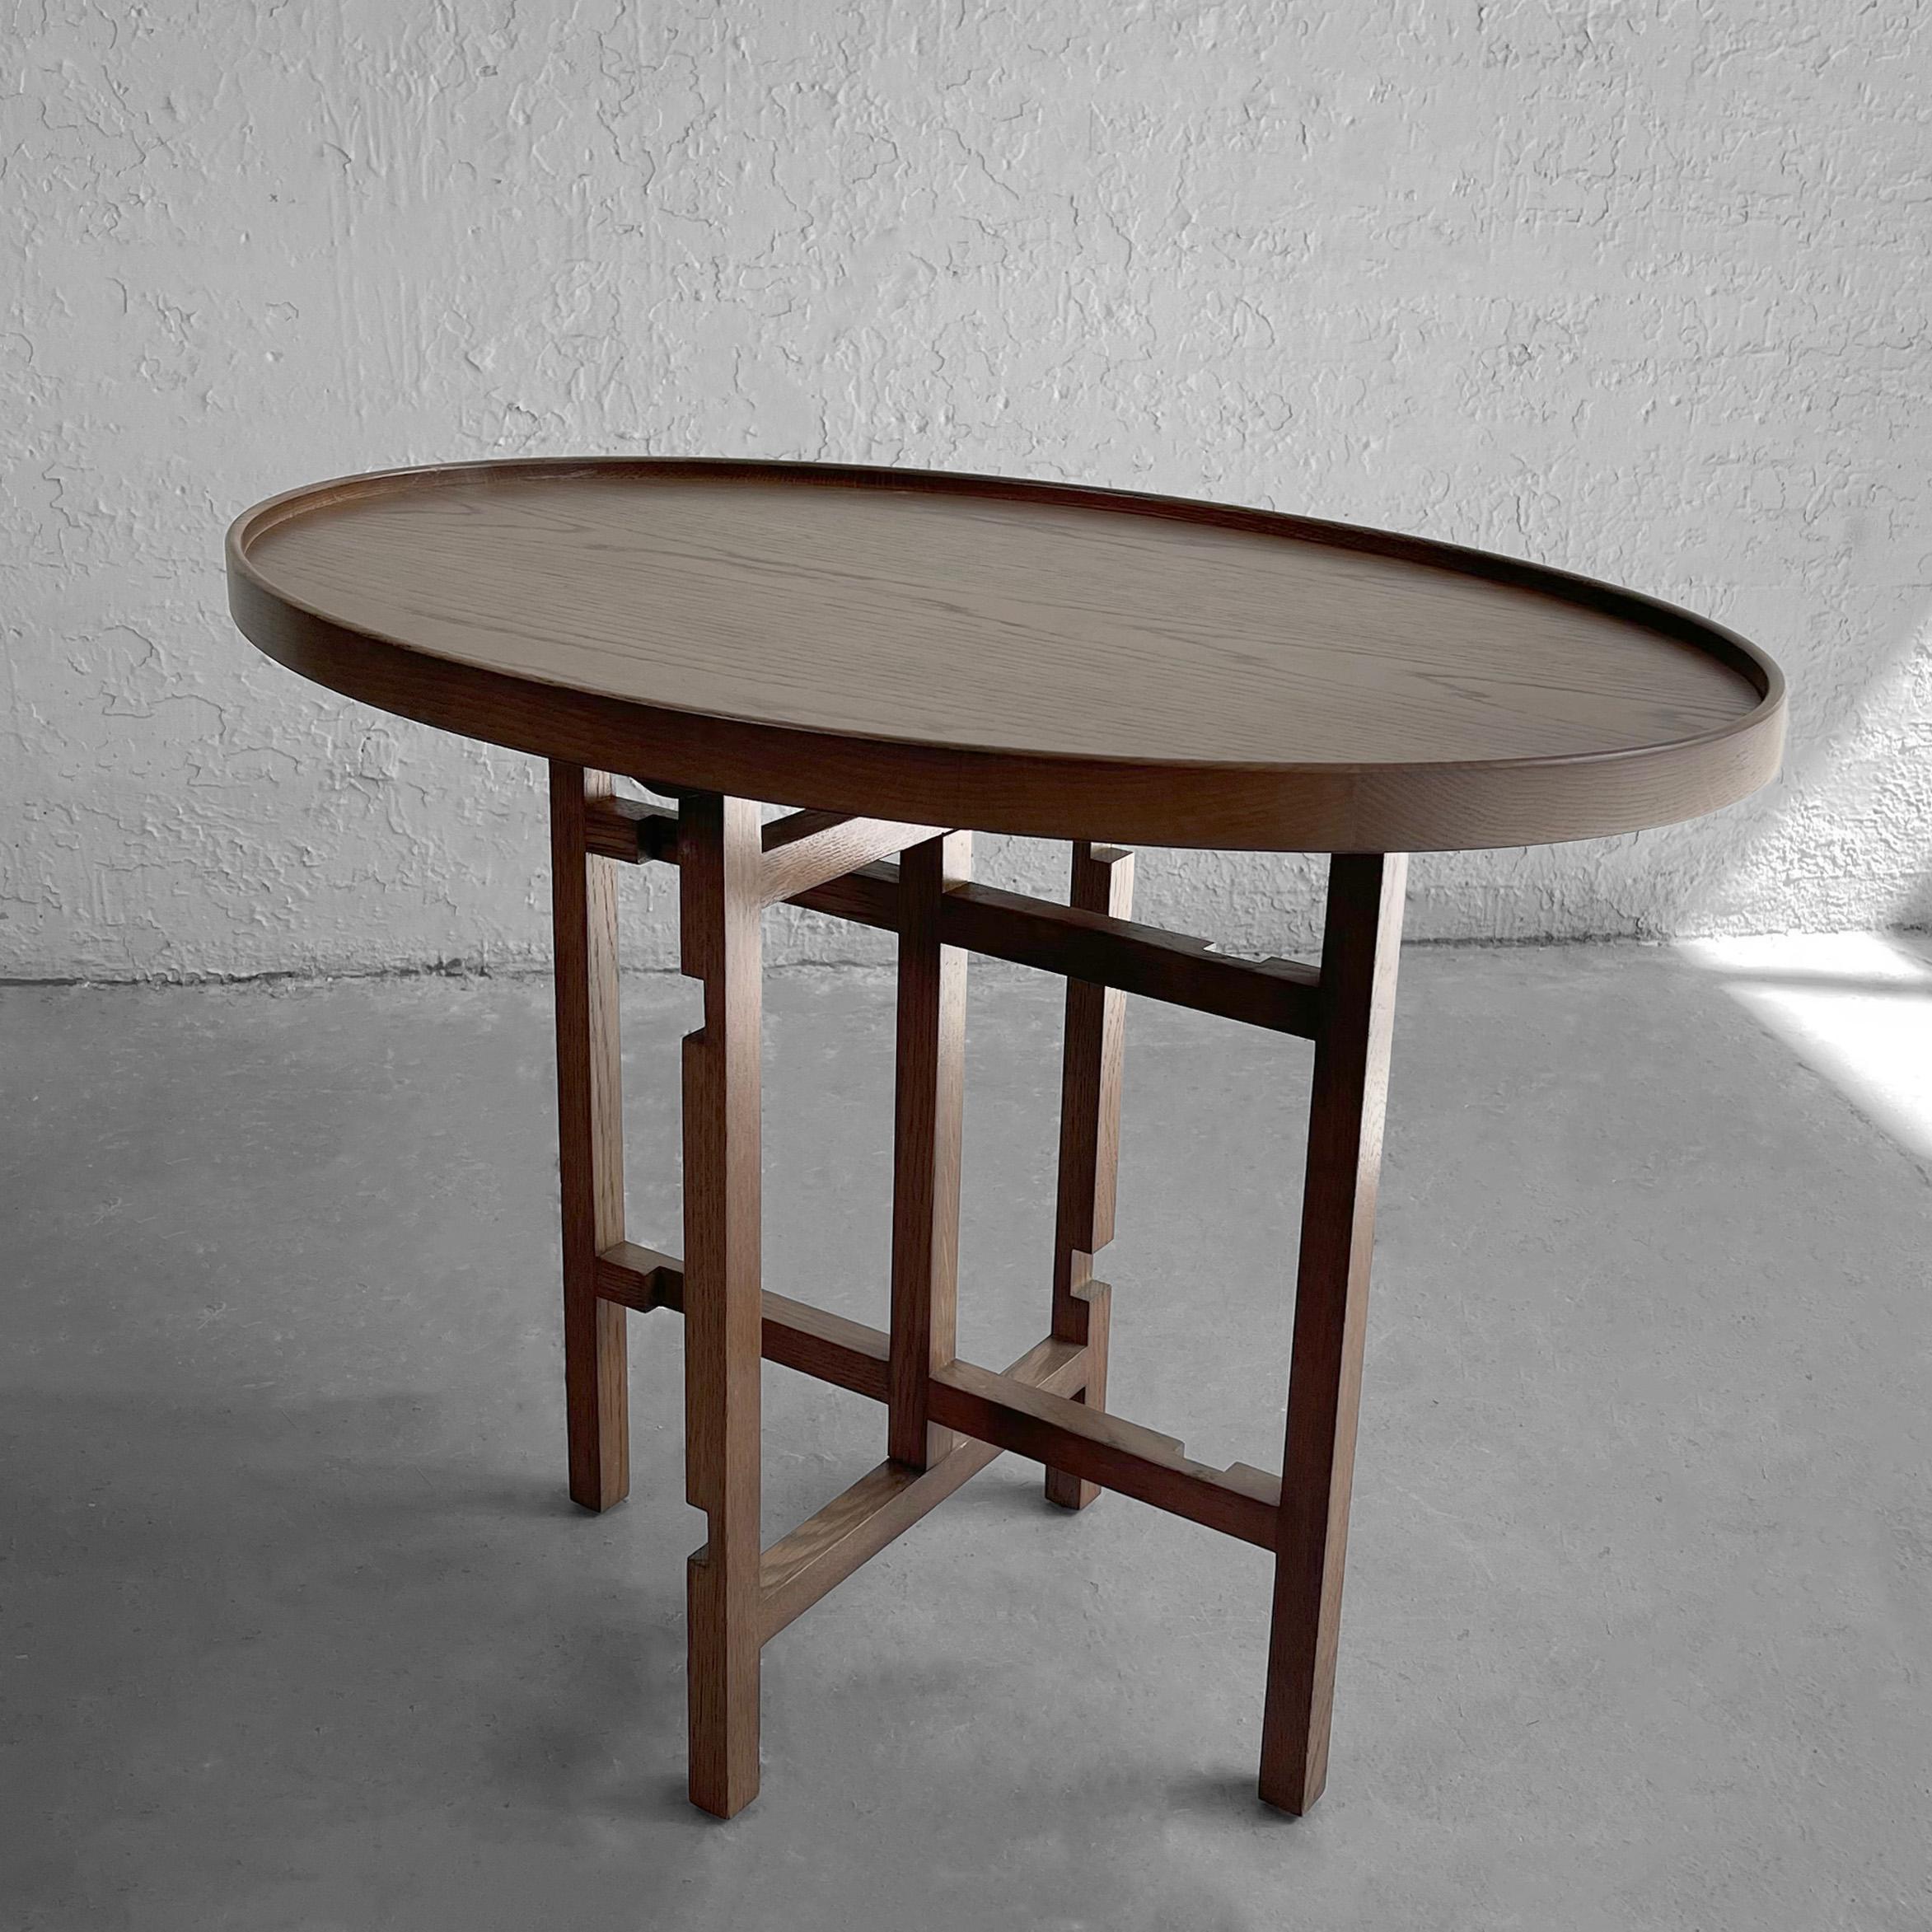 Art and crafts, craftsman-made, walnut side table features a recessed oval top with intersecting, latticed base. It's an interesting little accent table that works for many different applications and decors. 